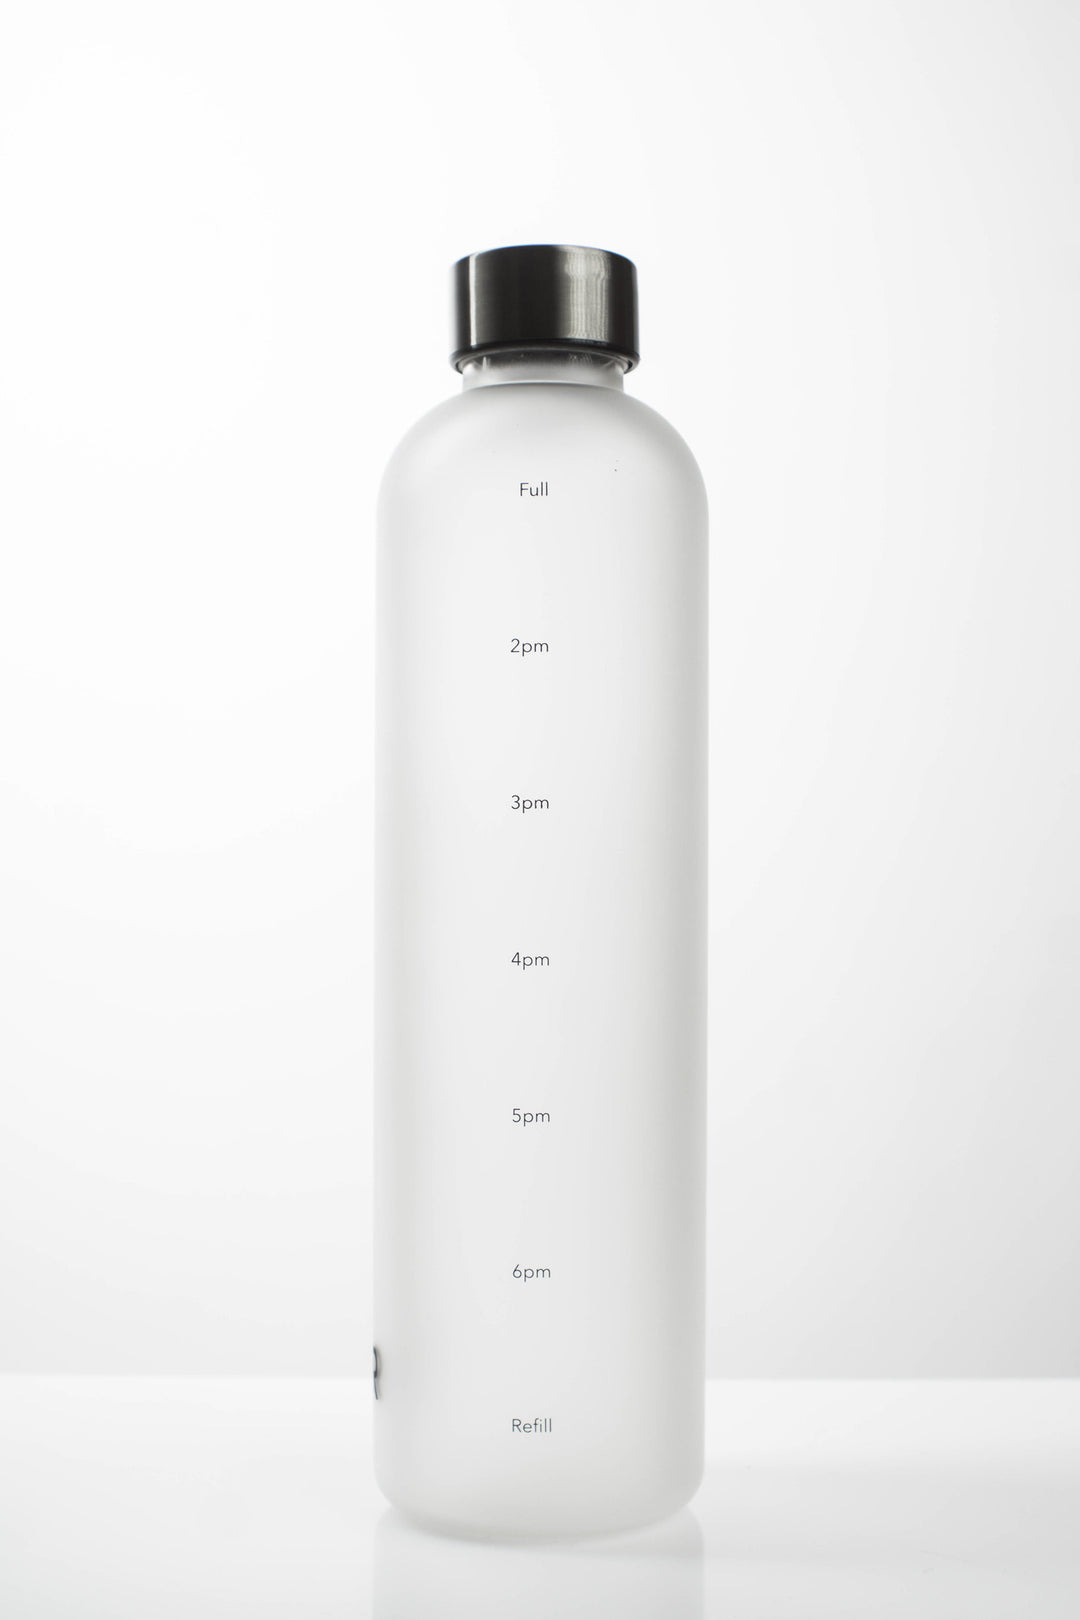 The Reusable Water Bottle